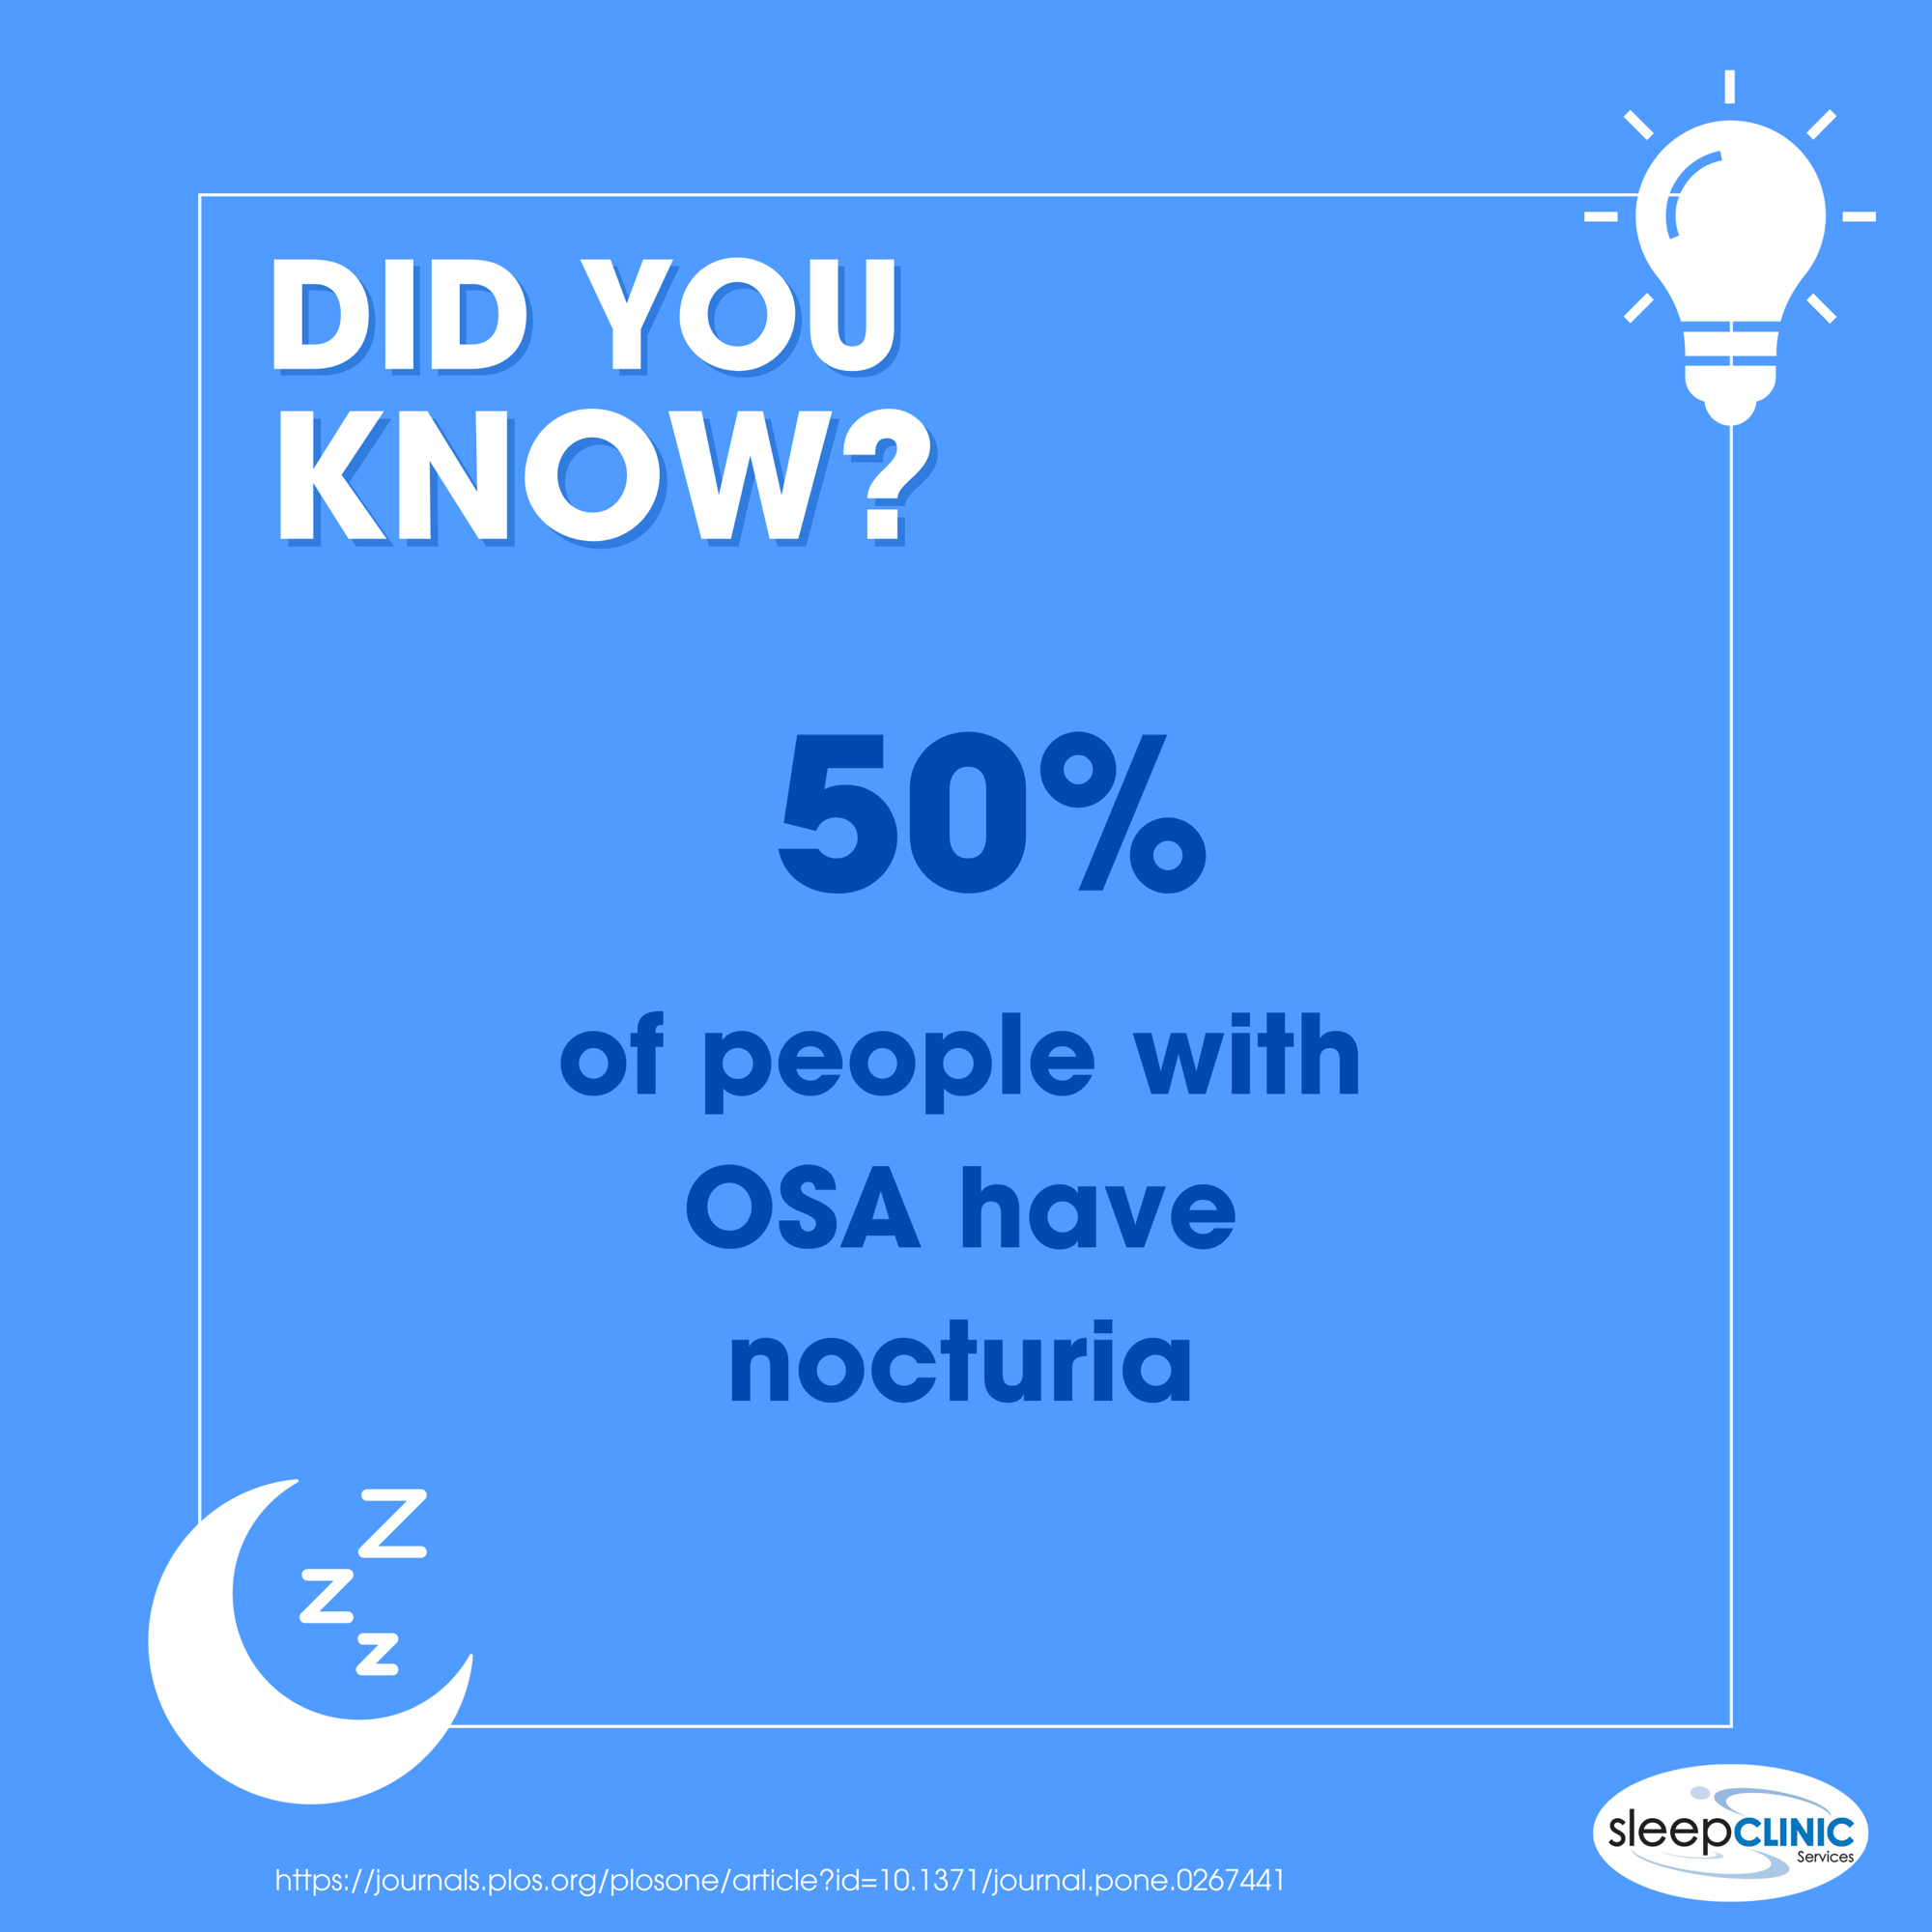 DID YOU KNOW nocturia